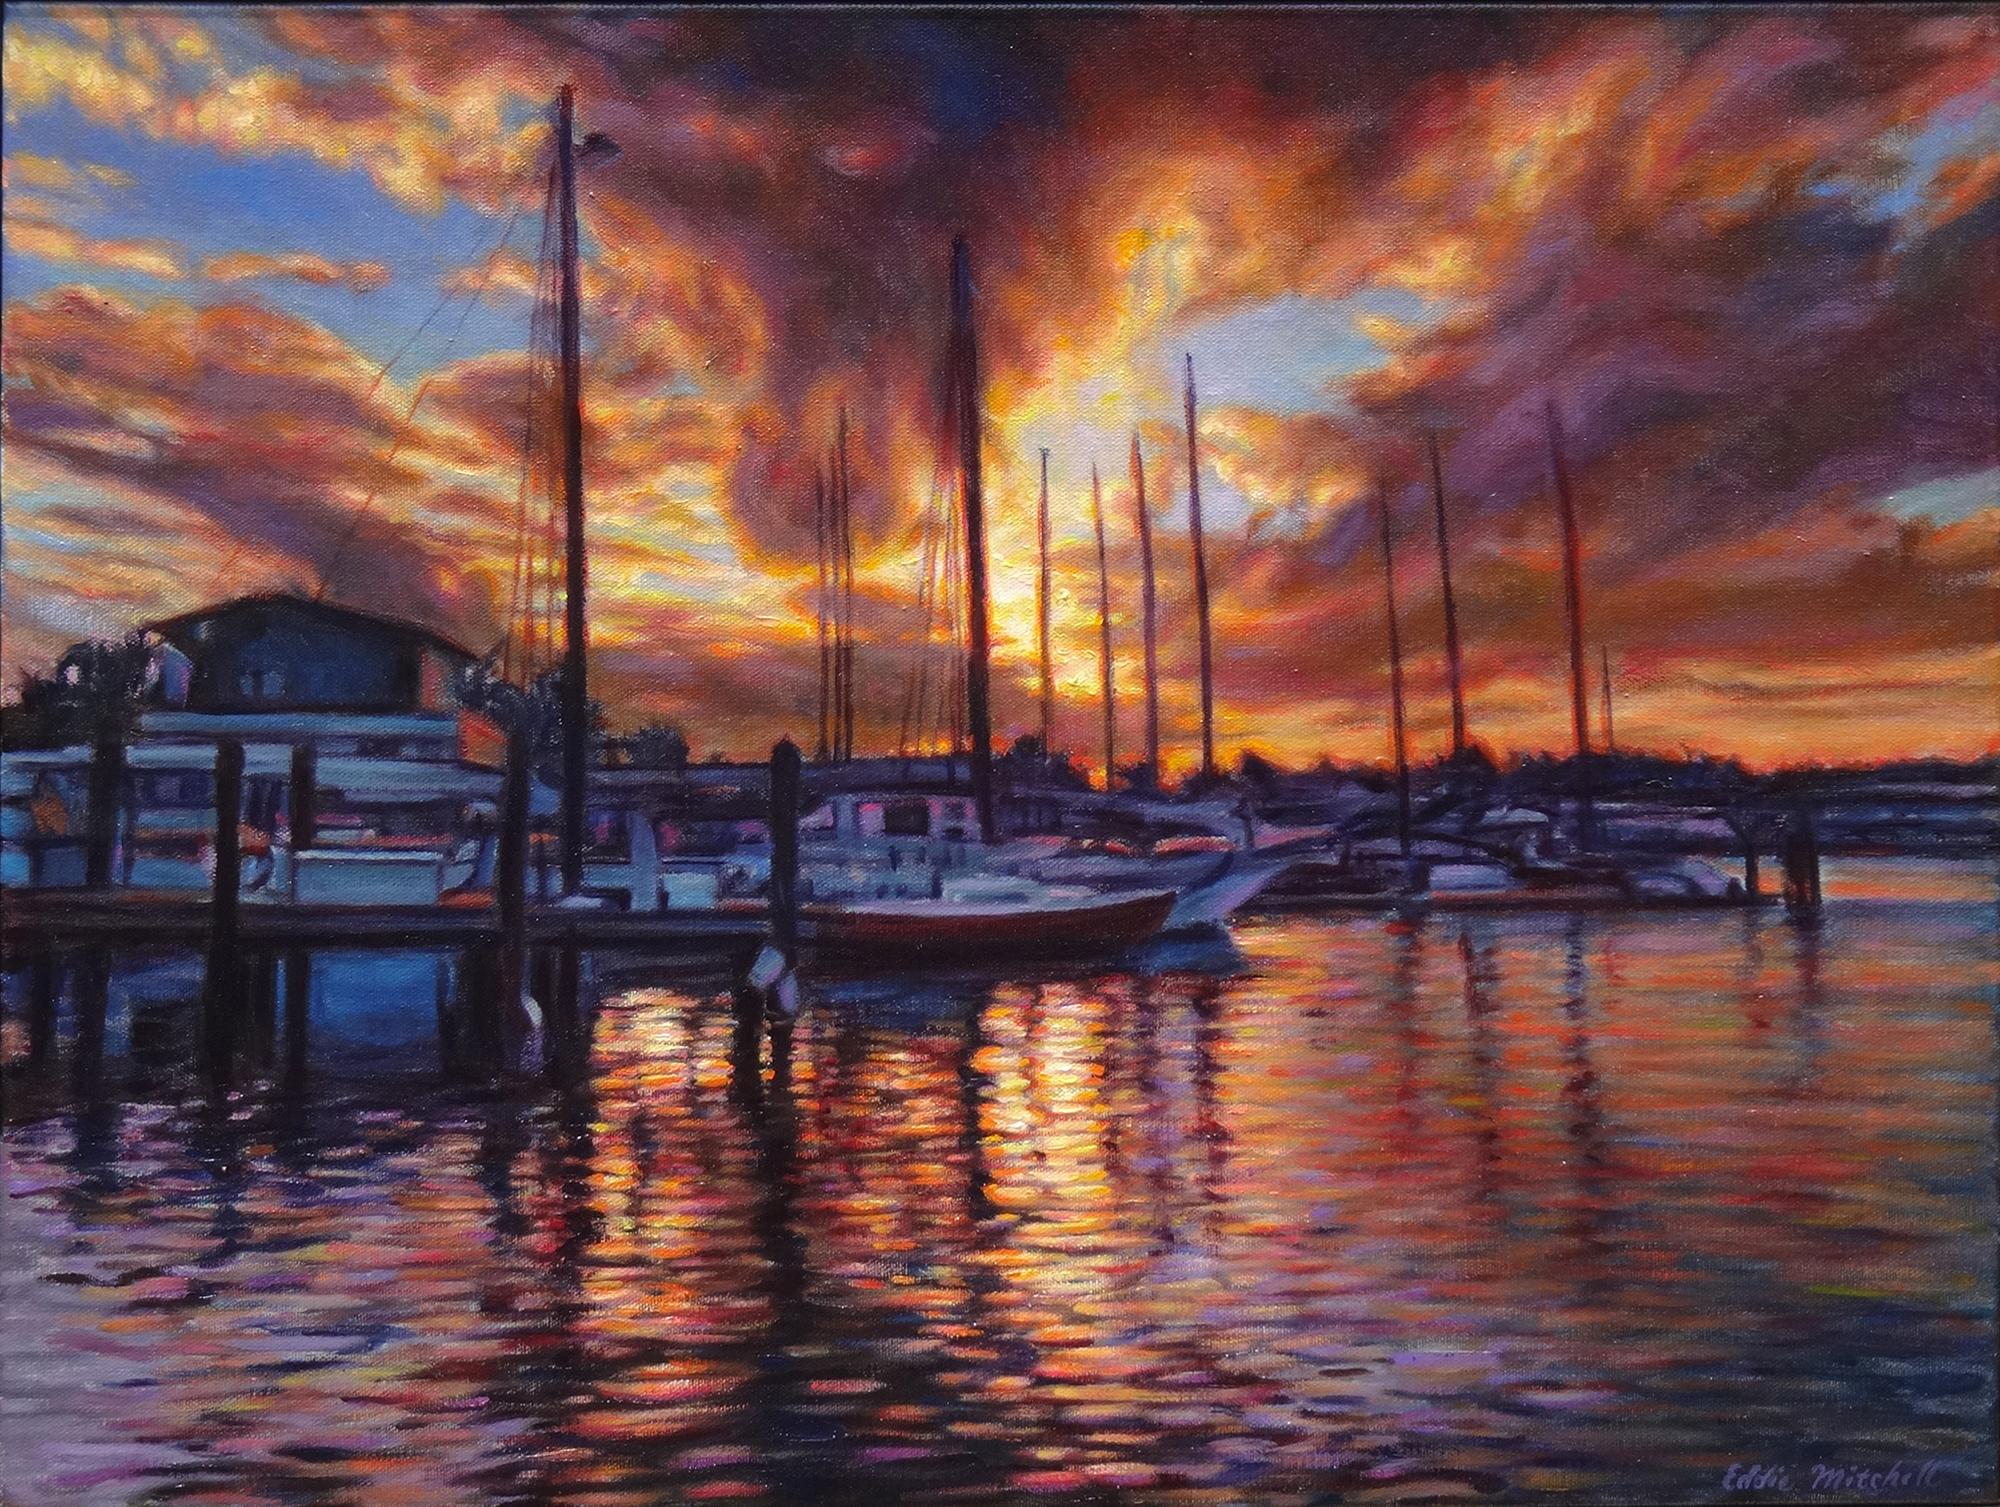 Eddie Mitchell Landscape Painting - "A Delightful Dance at Dusk"  Key West Boats Oil Impressionism  In Stock